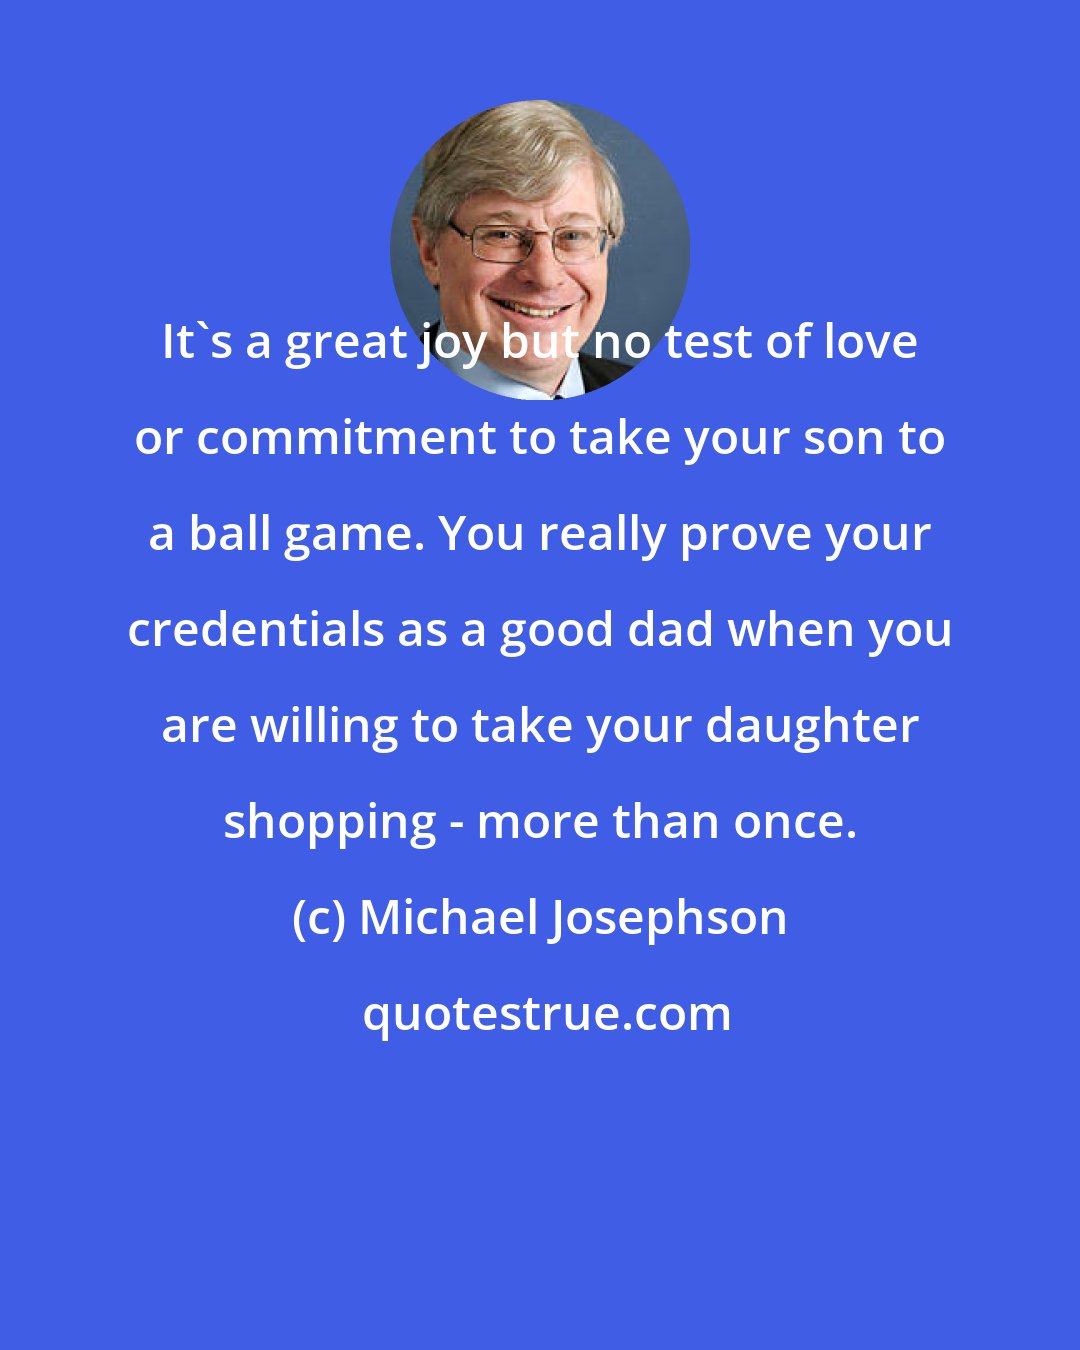 Michael Josephson: It's a great joy but no test of love or commitment to take your son to a ball game. You really prove your credentials as a good dad when you are willing to take your daughter shopping - more than once.